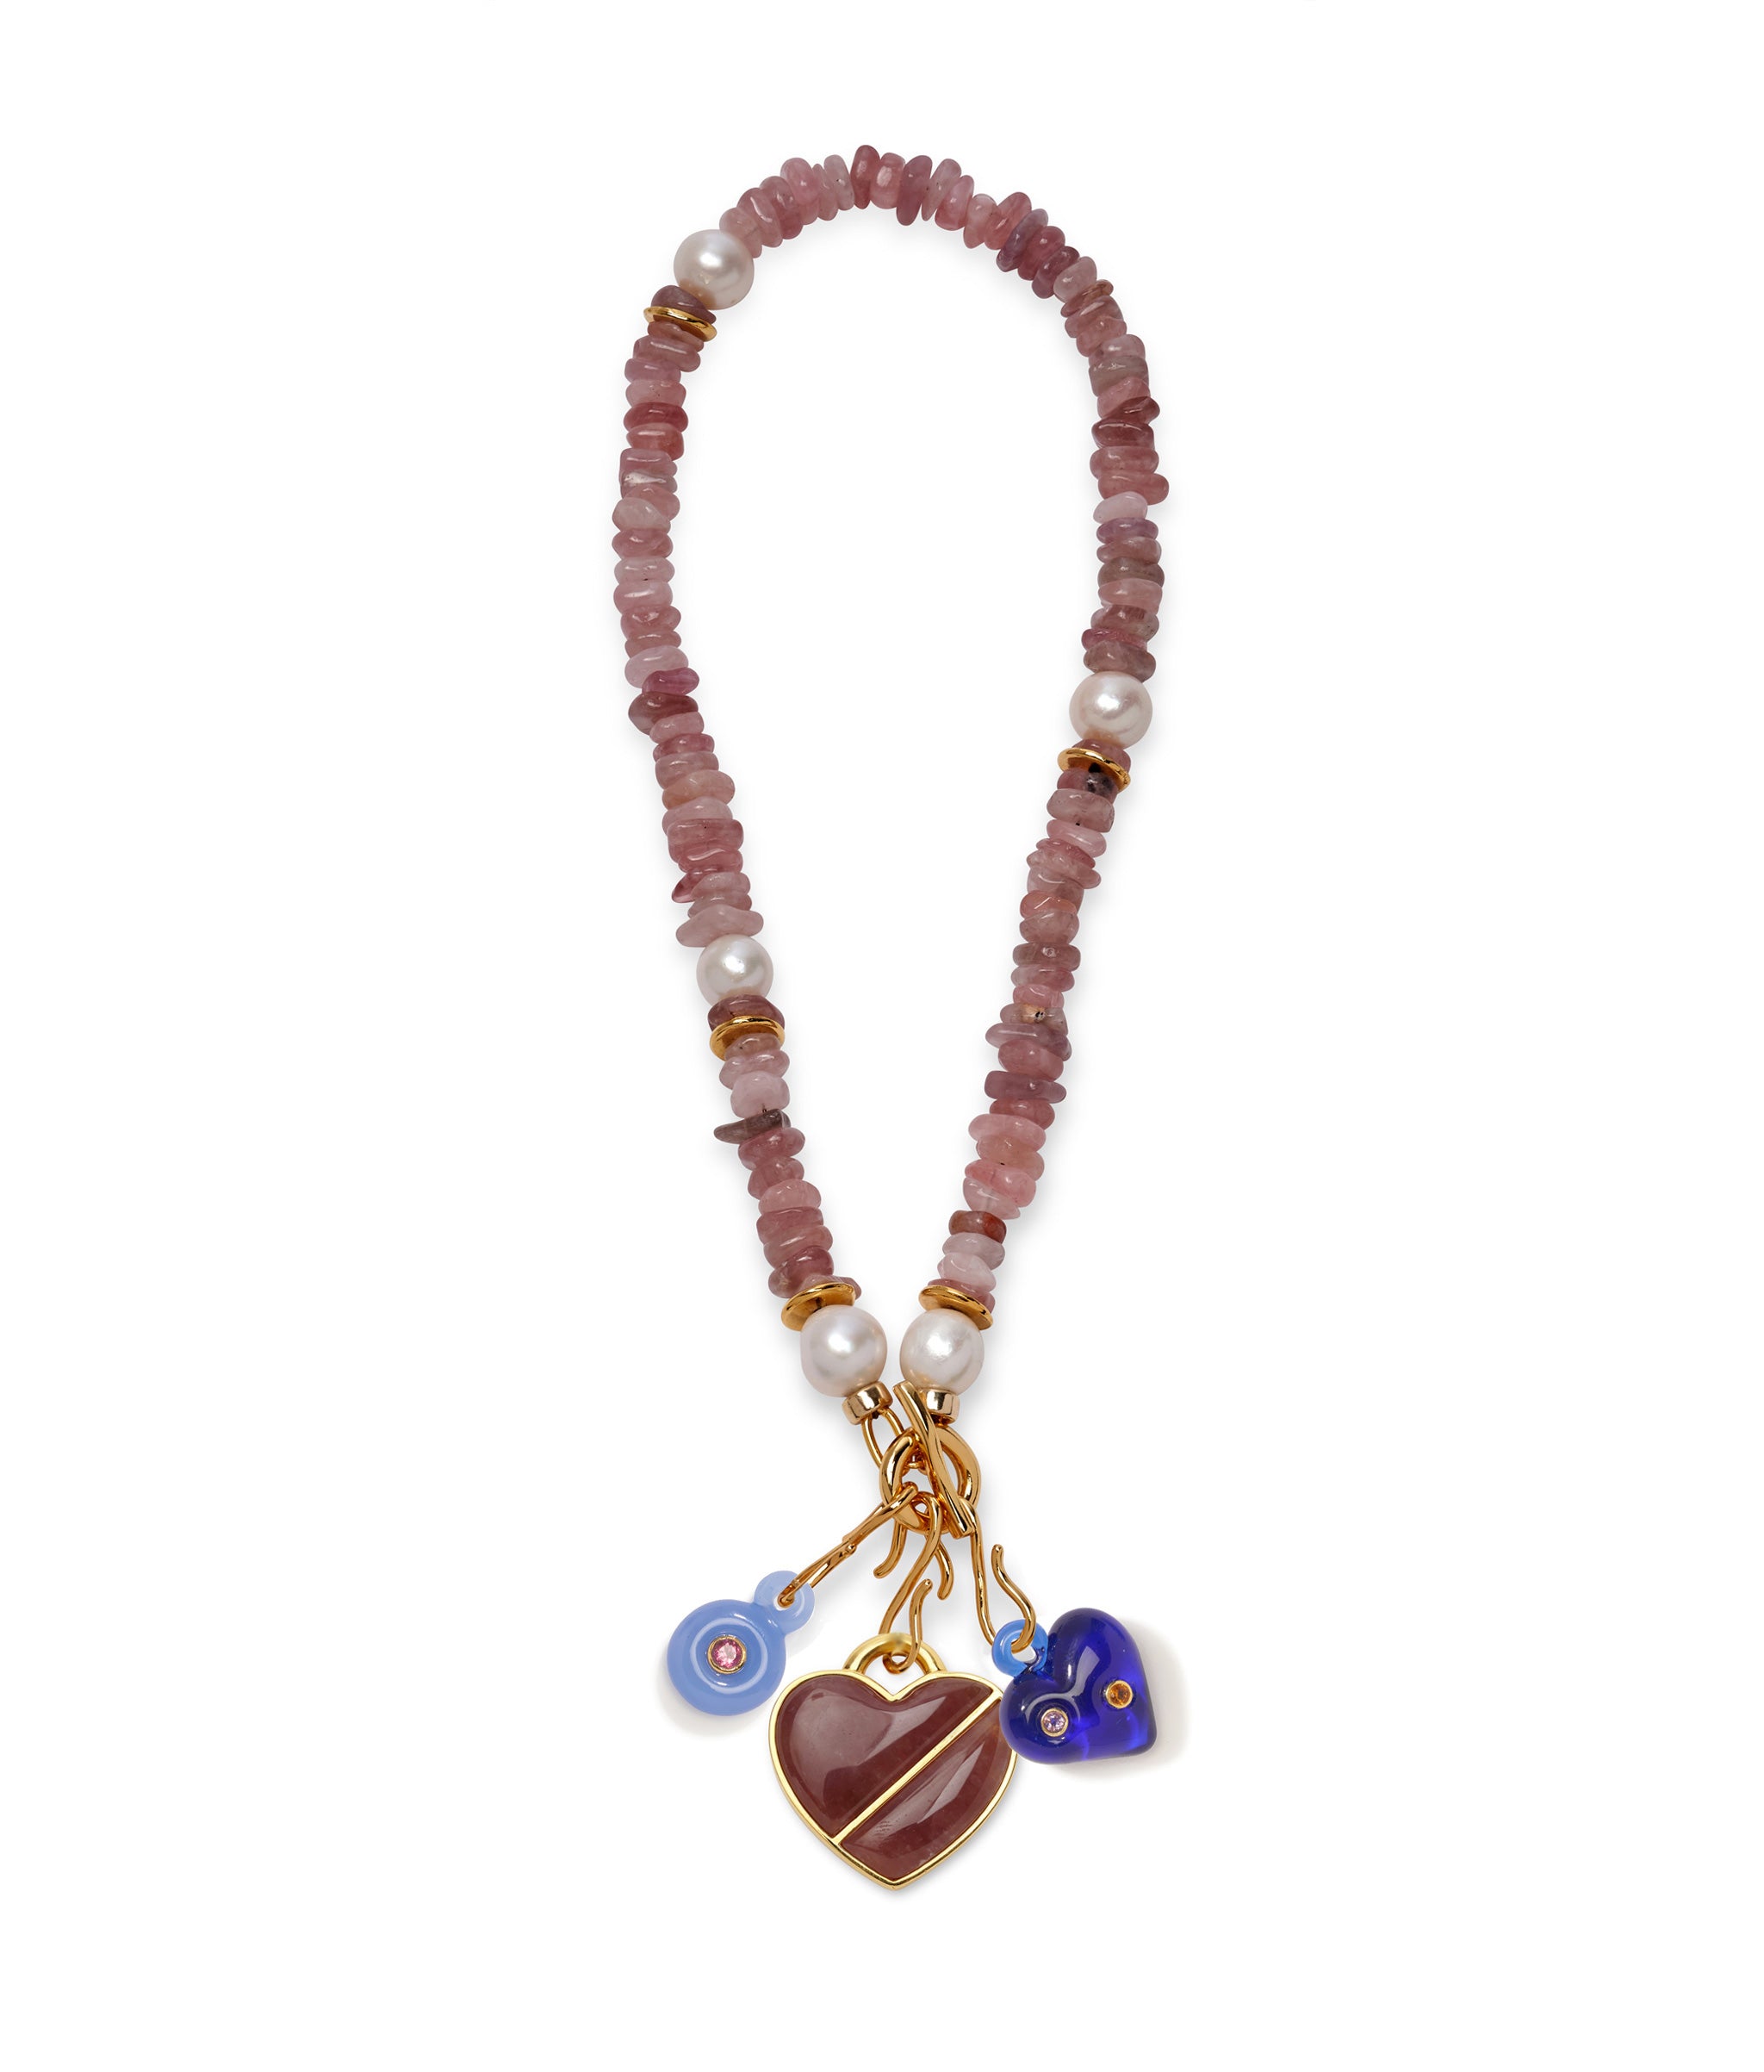 Mood Necklace in Strawberry Quartz with Mini Muse and Corazon charms and Heart Pendant in First Love.